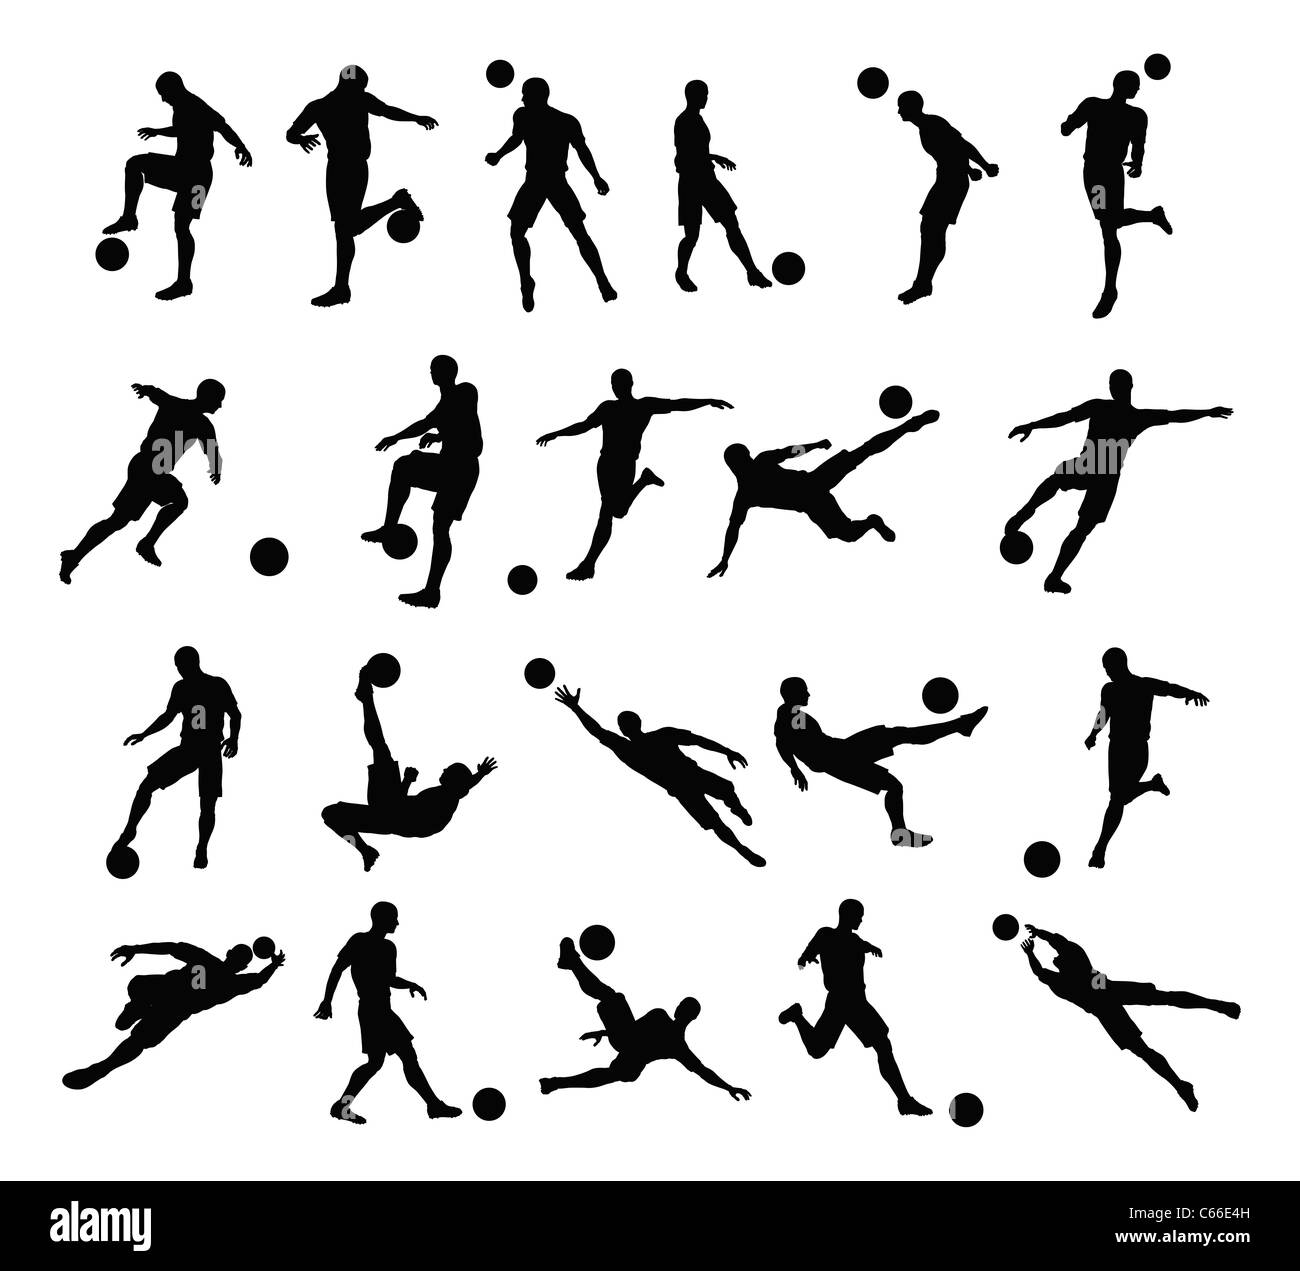 Very high quality detailed soccer football player silhouette Stock ...